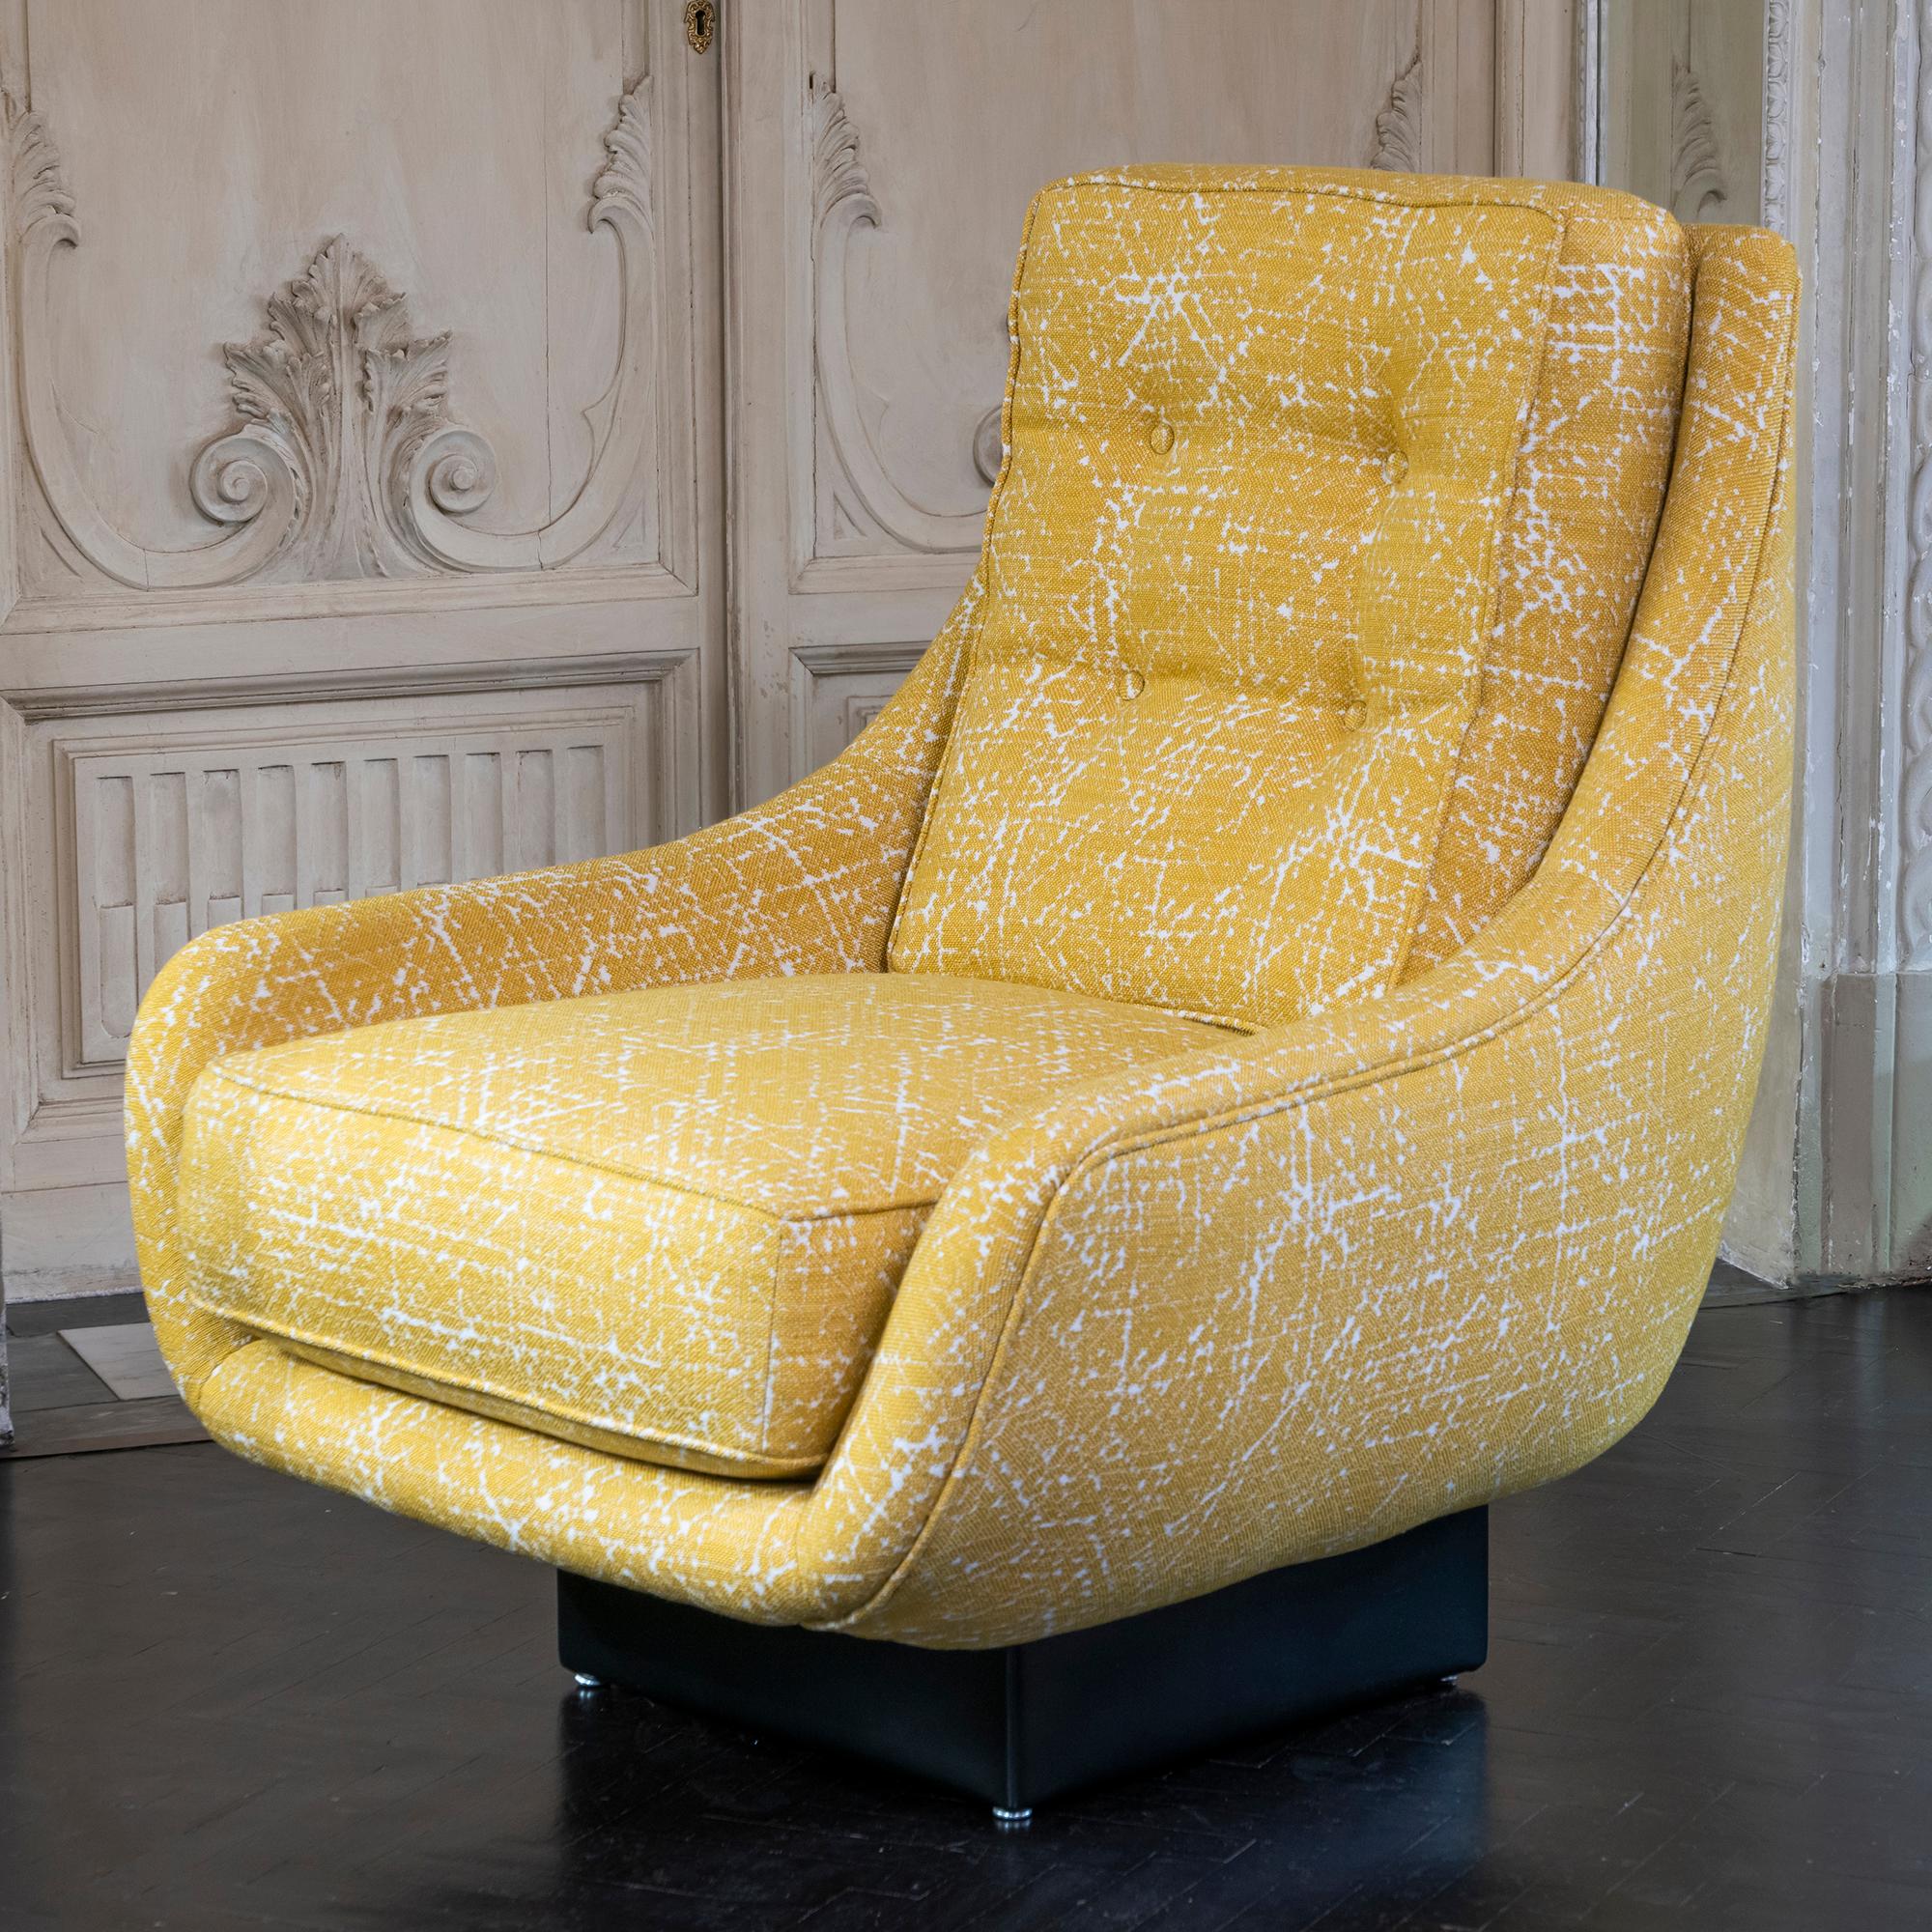 Contemporary armchairs part of the flair edition collection, upholstered in yellow and white jacquard fabric, black leather base, sold as a pair, Italy, 2020.